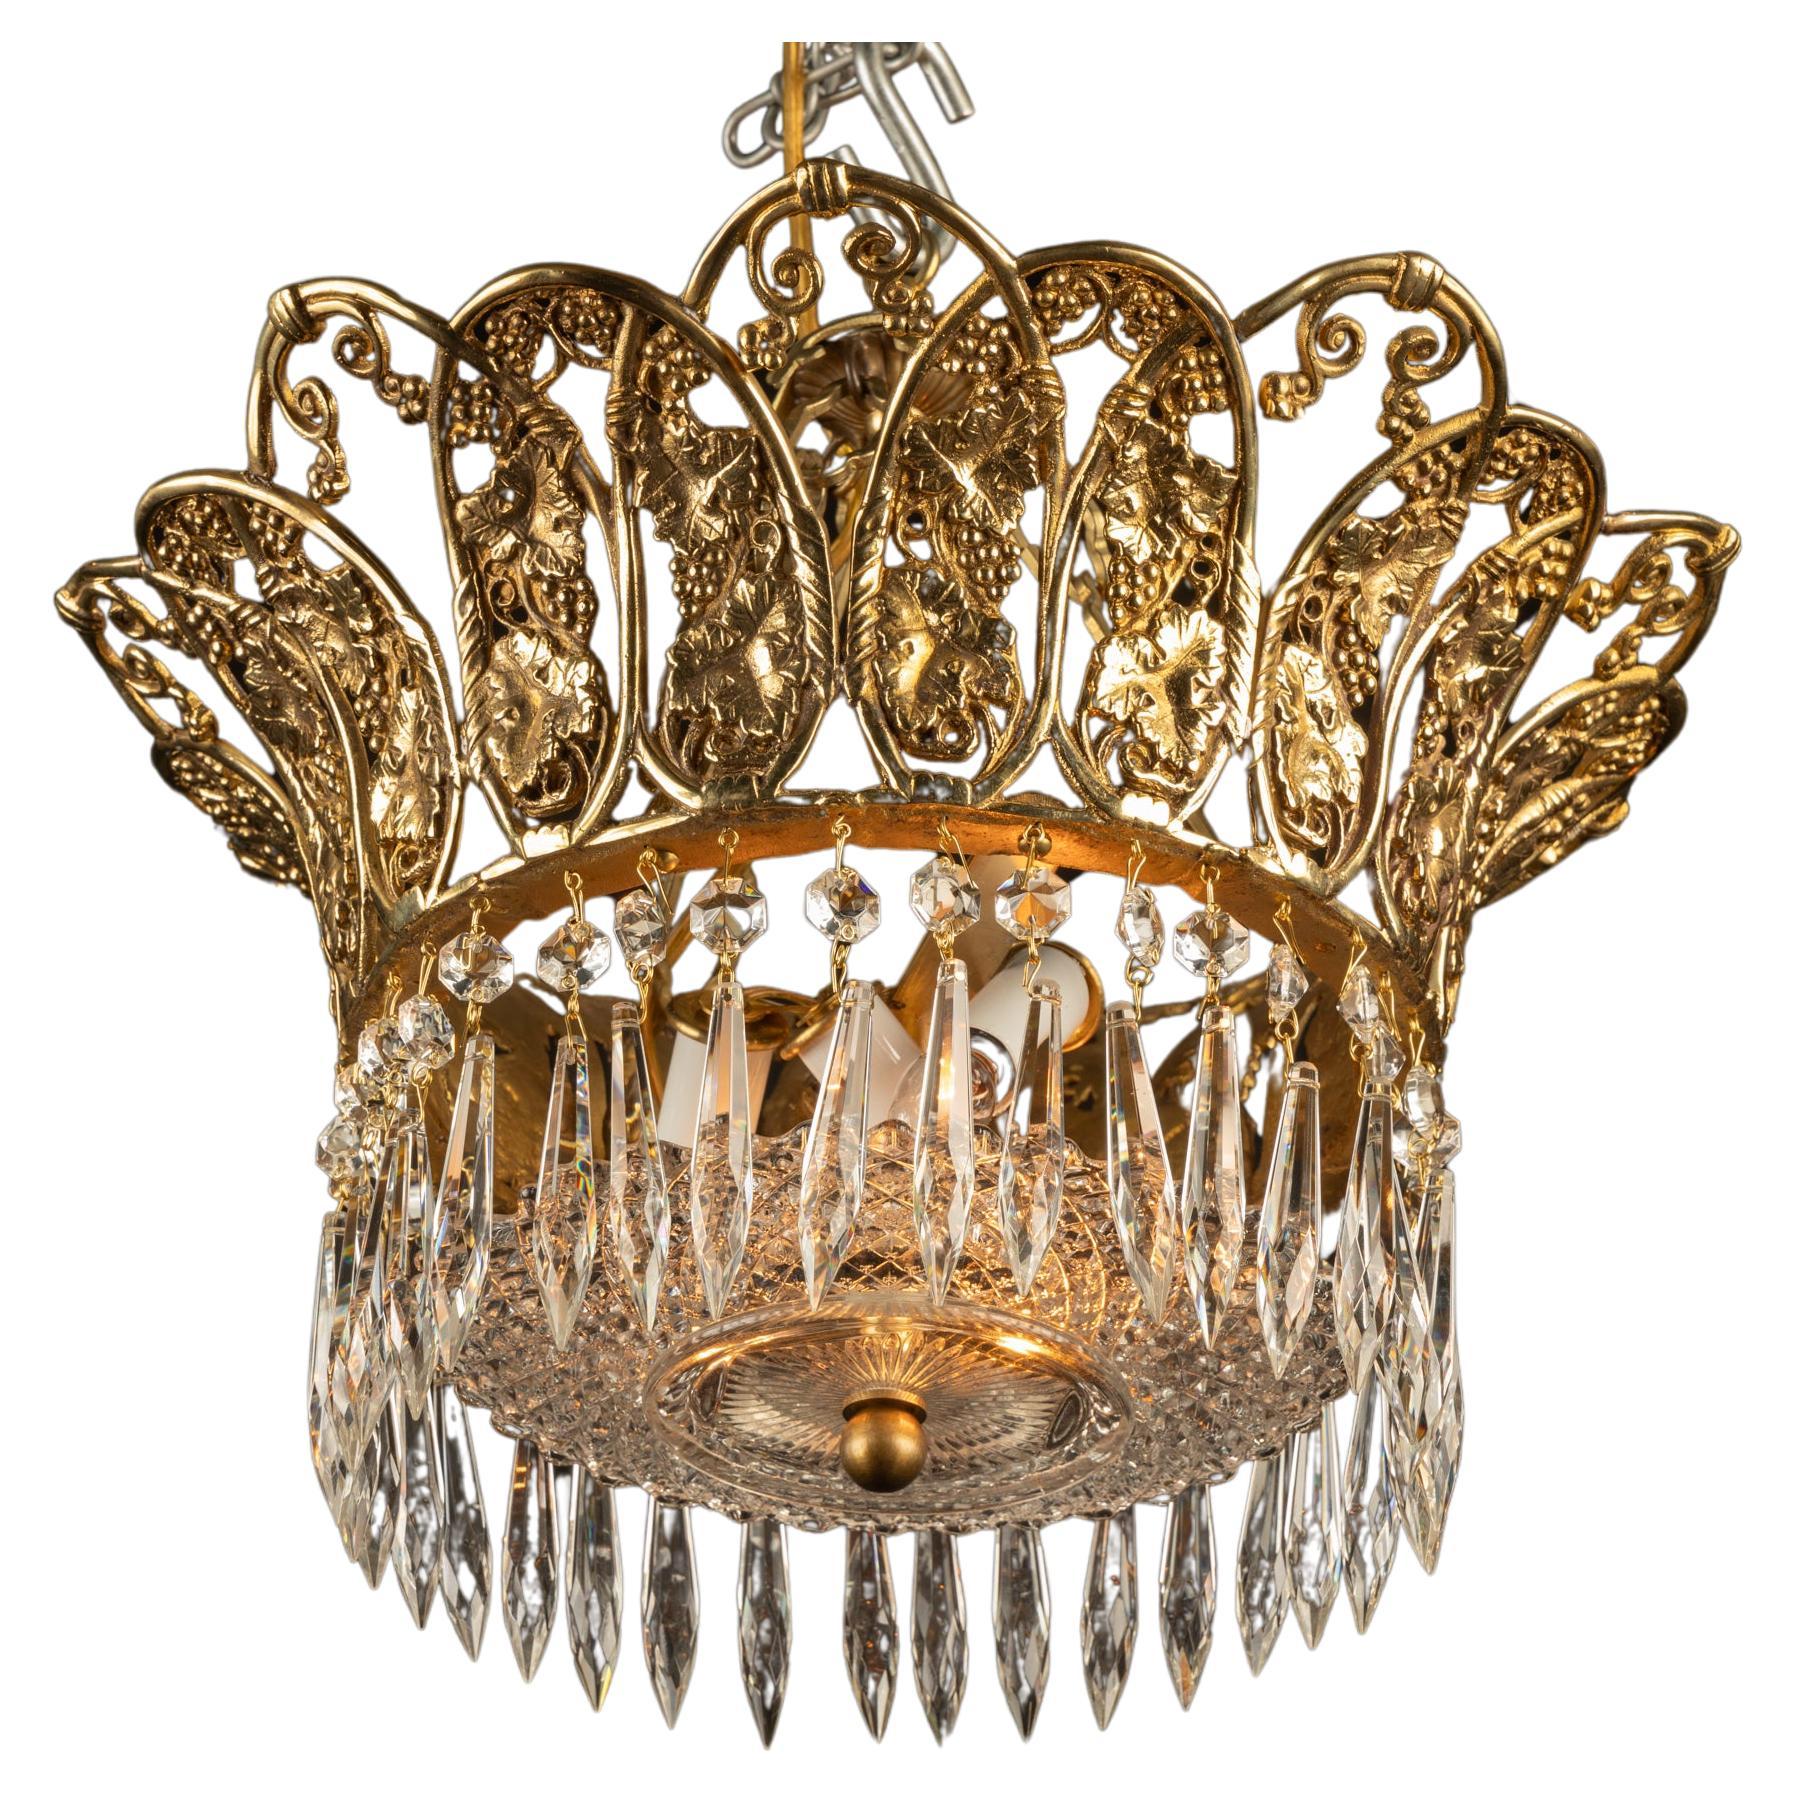 Unique French Bronze and Crystal Chandelier with Grape Motif, Early 20th Century For Sale